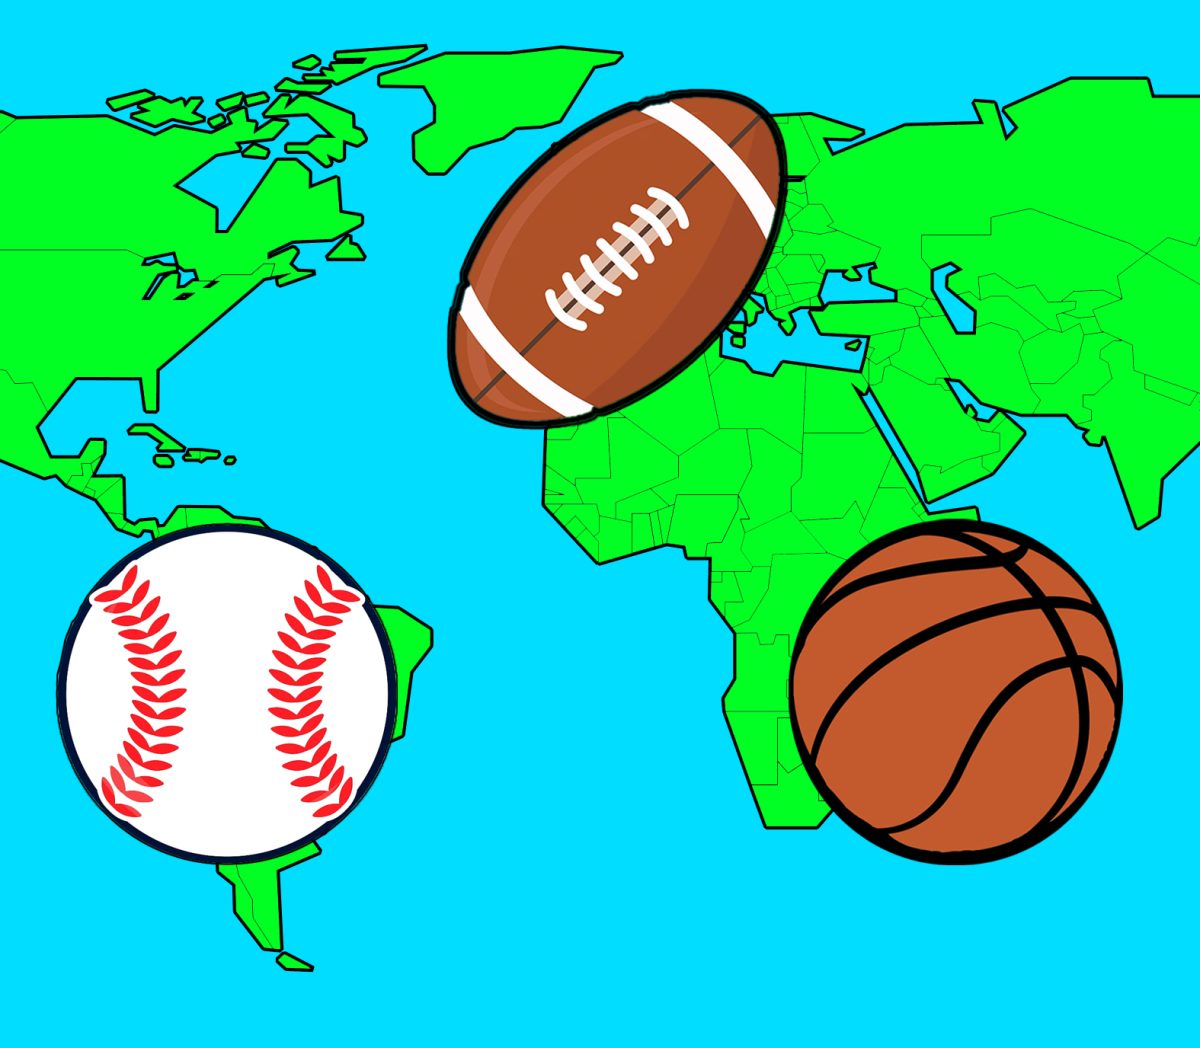 The rise in foreign sports players has lead to a tremendous boom in talent in domestic sports arena, most notably in the MLB, NFL and NBA.